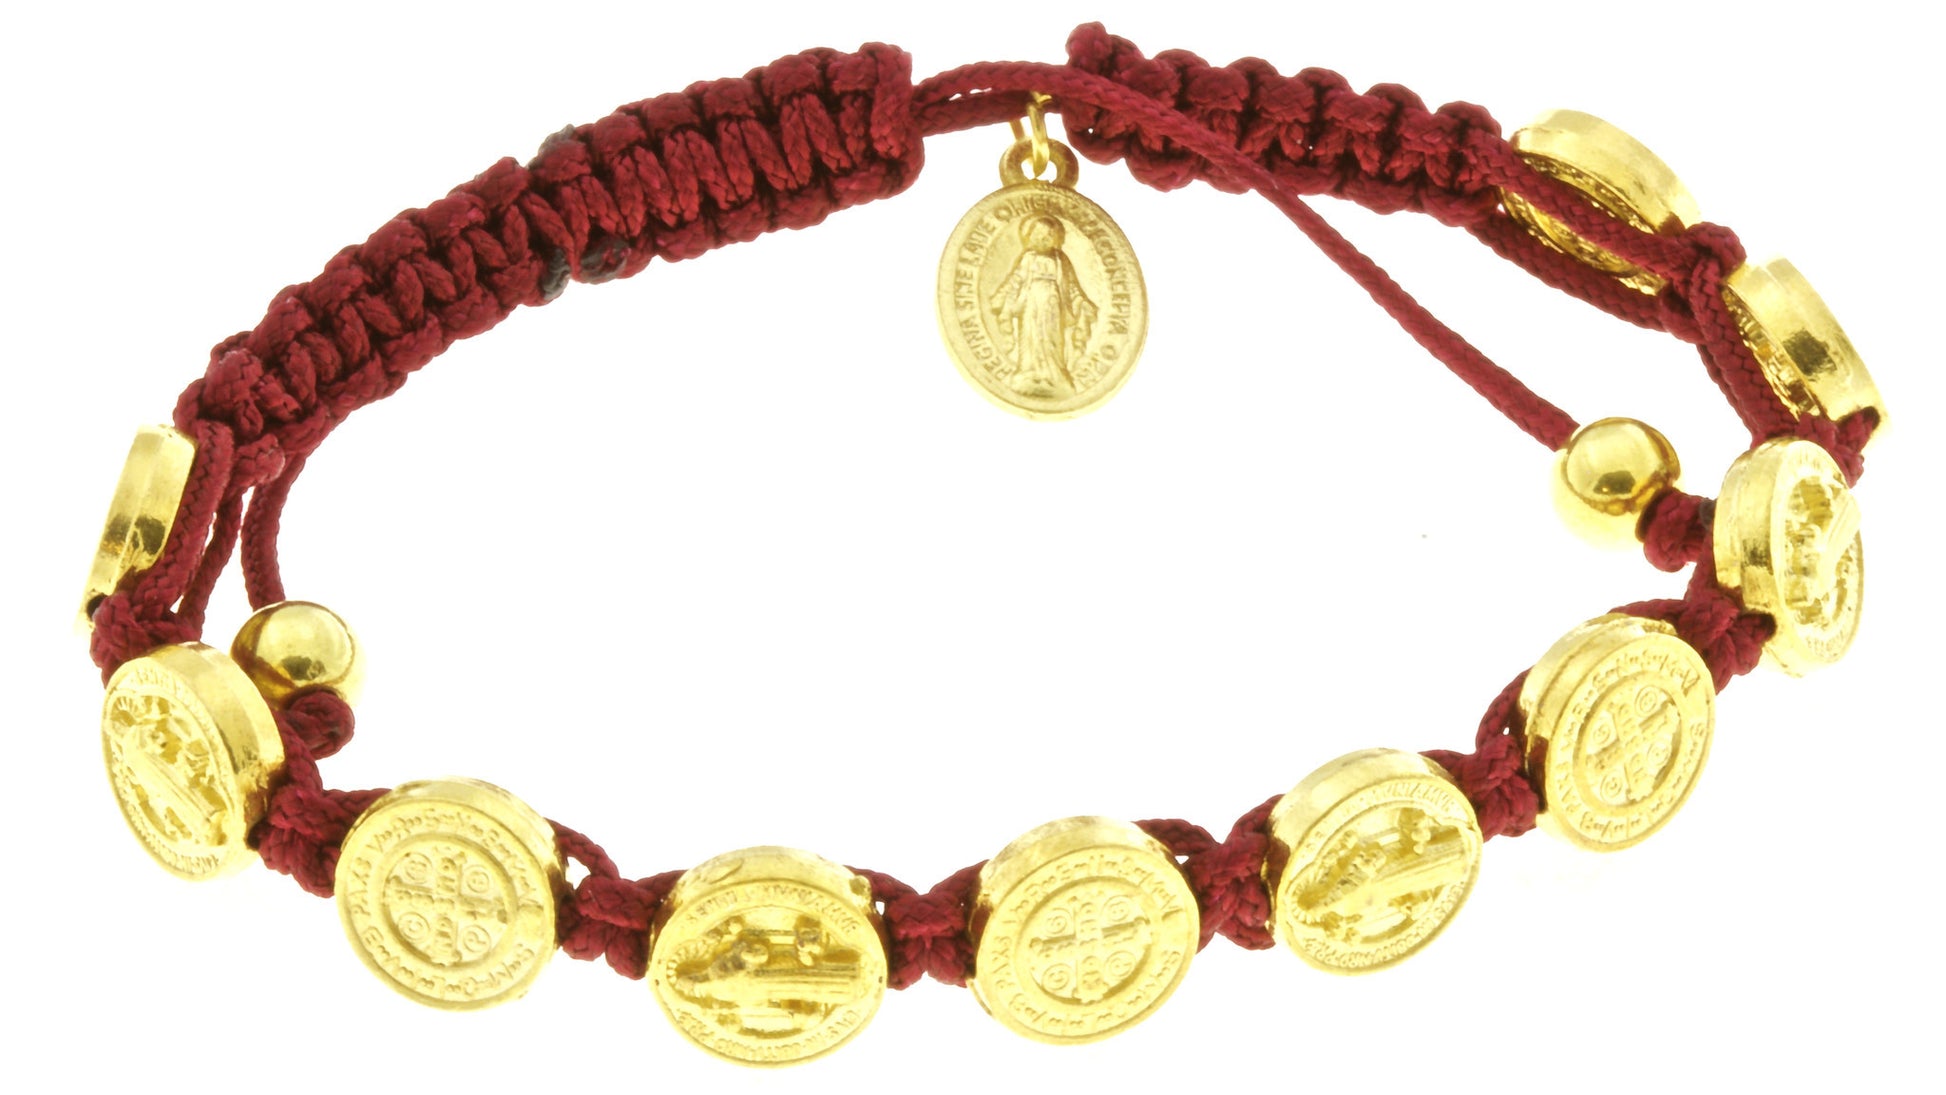 10 St Benedict Corded Bracelet Red with Miraculous Medal and Prayer Booklets